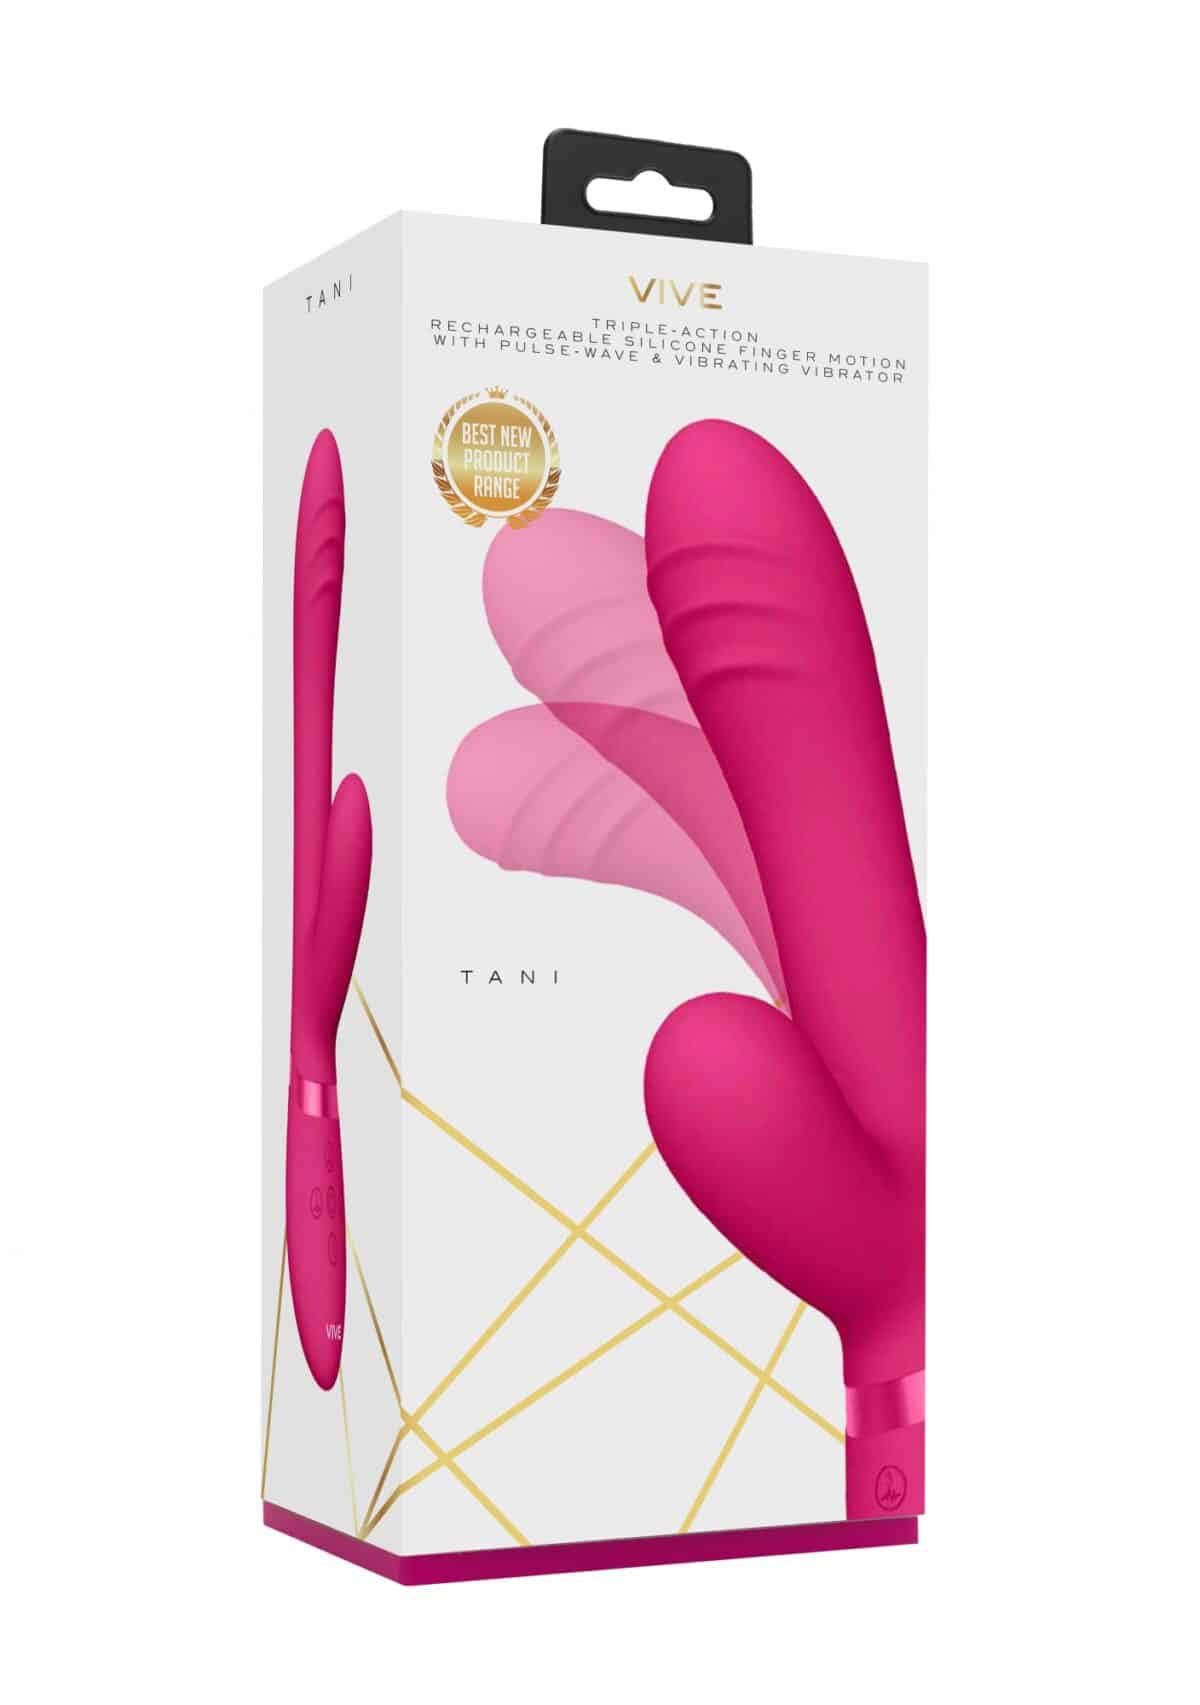 Tani Finger Motion with Pulse Wave Vibrator pink